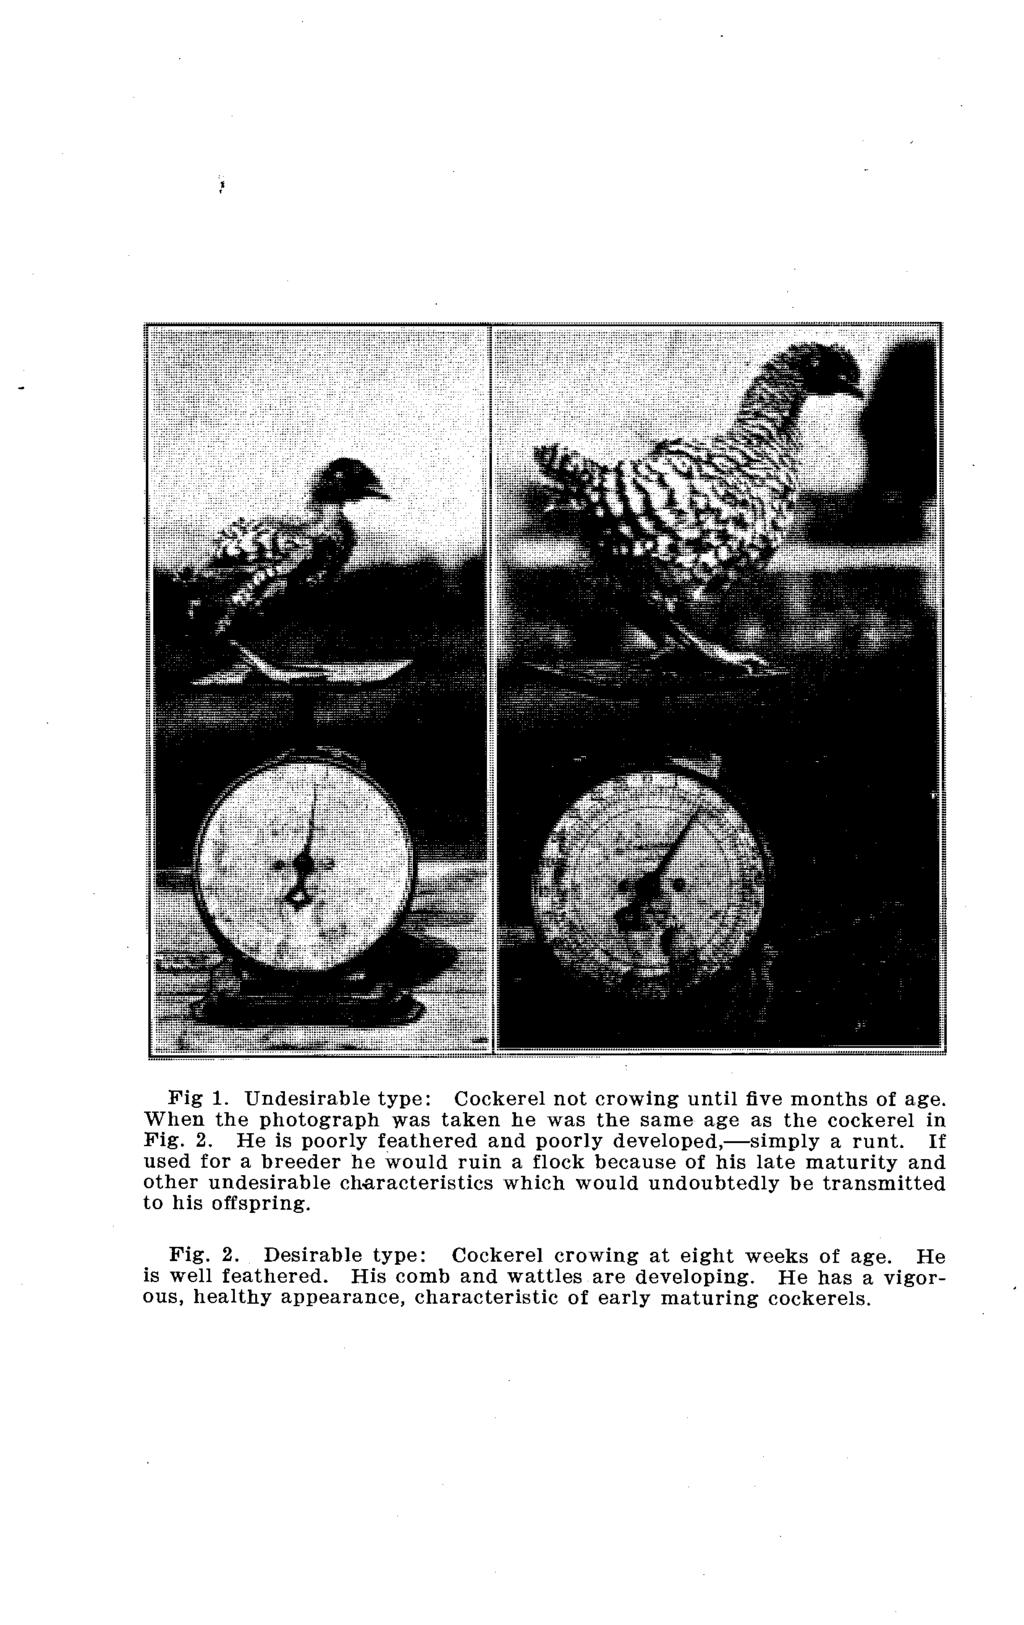 Fig 1. Undesirable type: Cockerel not crowing until five months of age. When the photograph was taken he was the same age as the cockerel in Fig. 2.